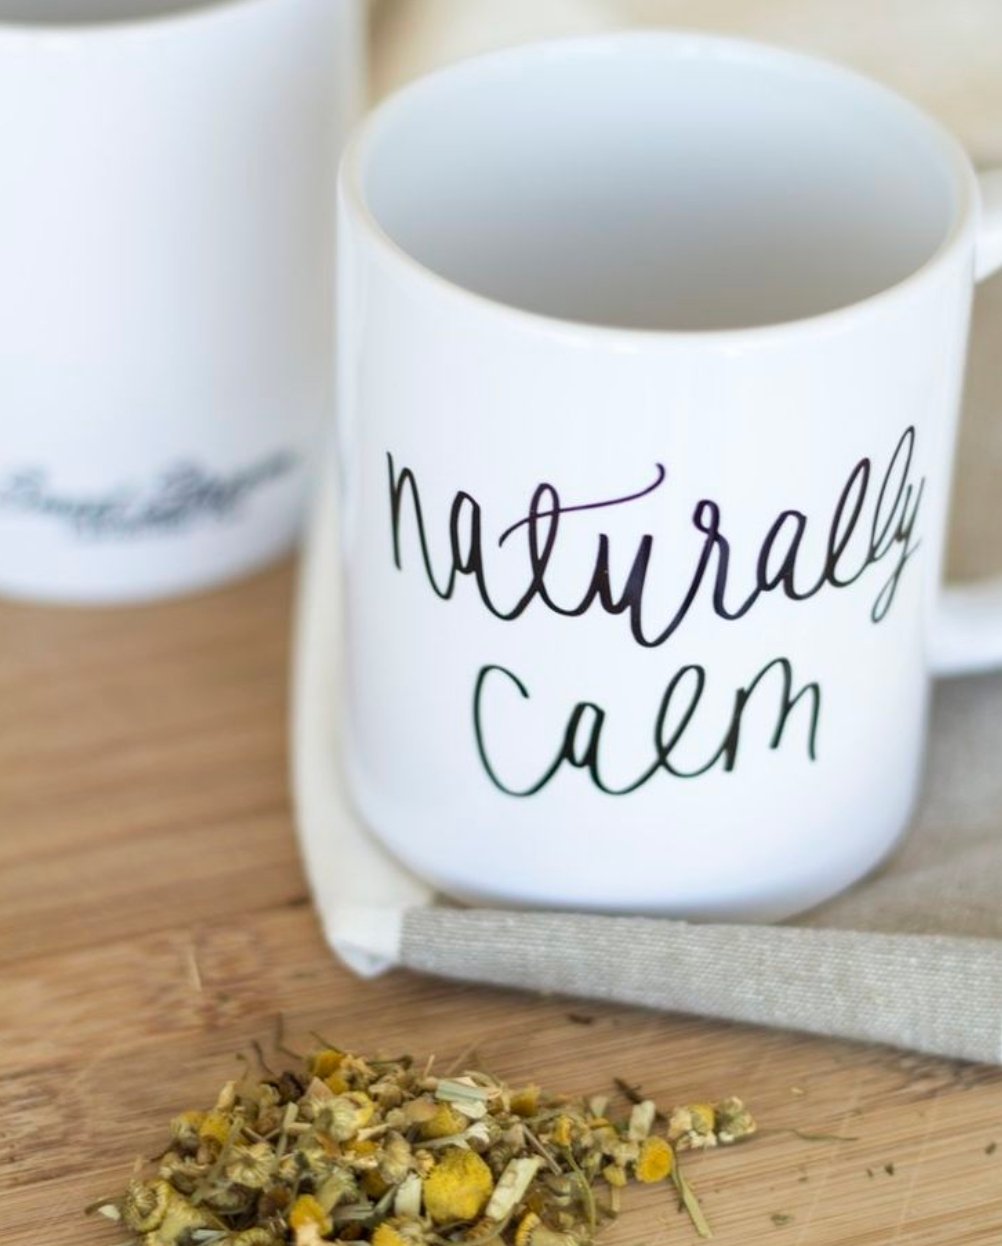 In Kansas we have had a lot of rain. Let's warm up with some hot, restorative herbal tea. Sereni-tea lavender tea is our favorite.⠀⠀⠀⠀⠀⠀⠀⠀⠀
⠀⠀⠀⠀⠀⠀⠀⠀⠀
Sereni-Tea (Relaxation Blend): Unwind after a long day or before bedtime with this calming blend. Sw